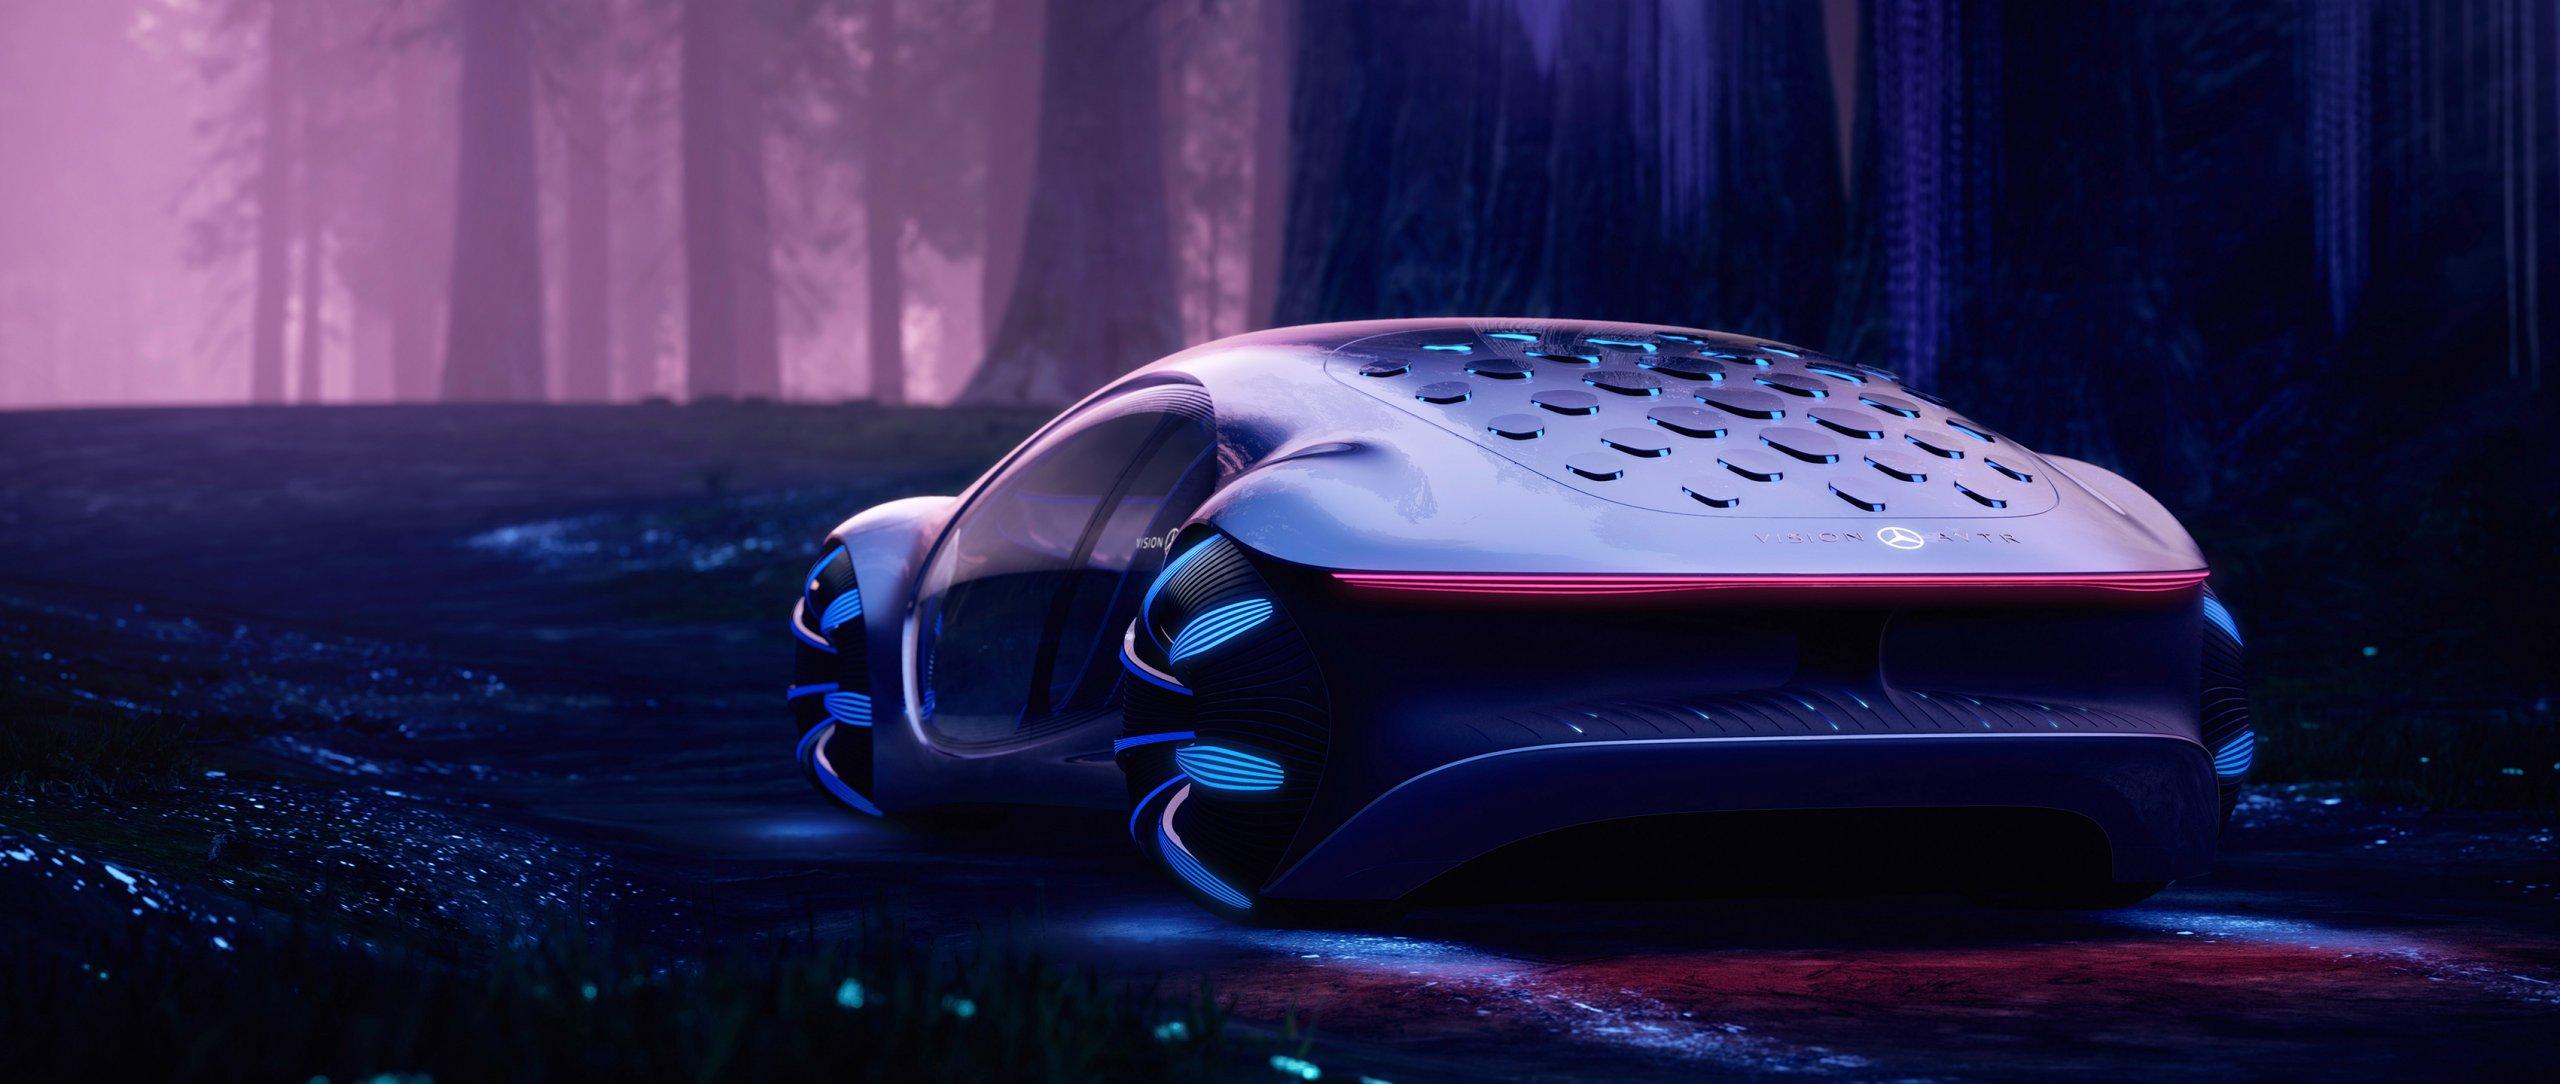 Inspired By The Future: The Mercedes Benz VISION AVTR